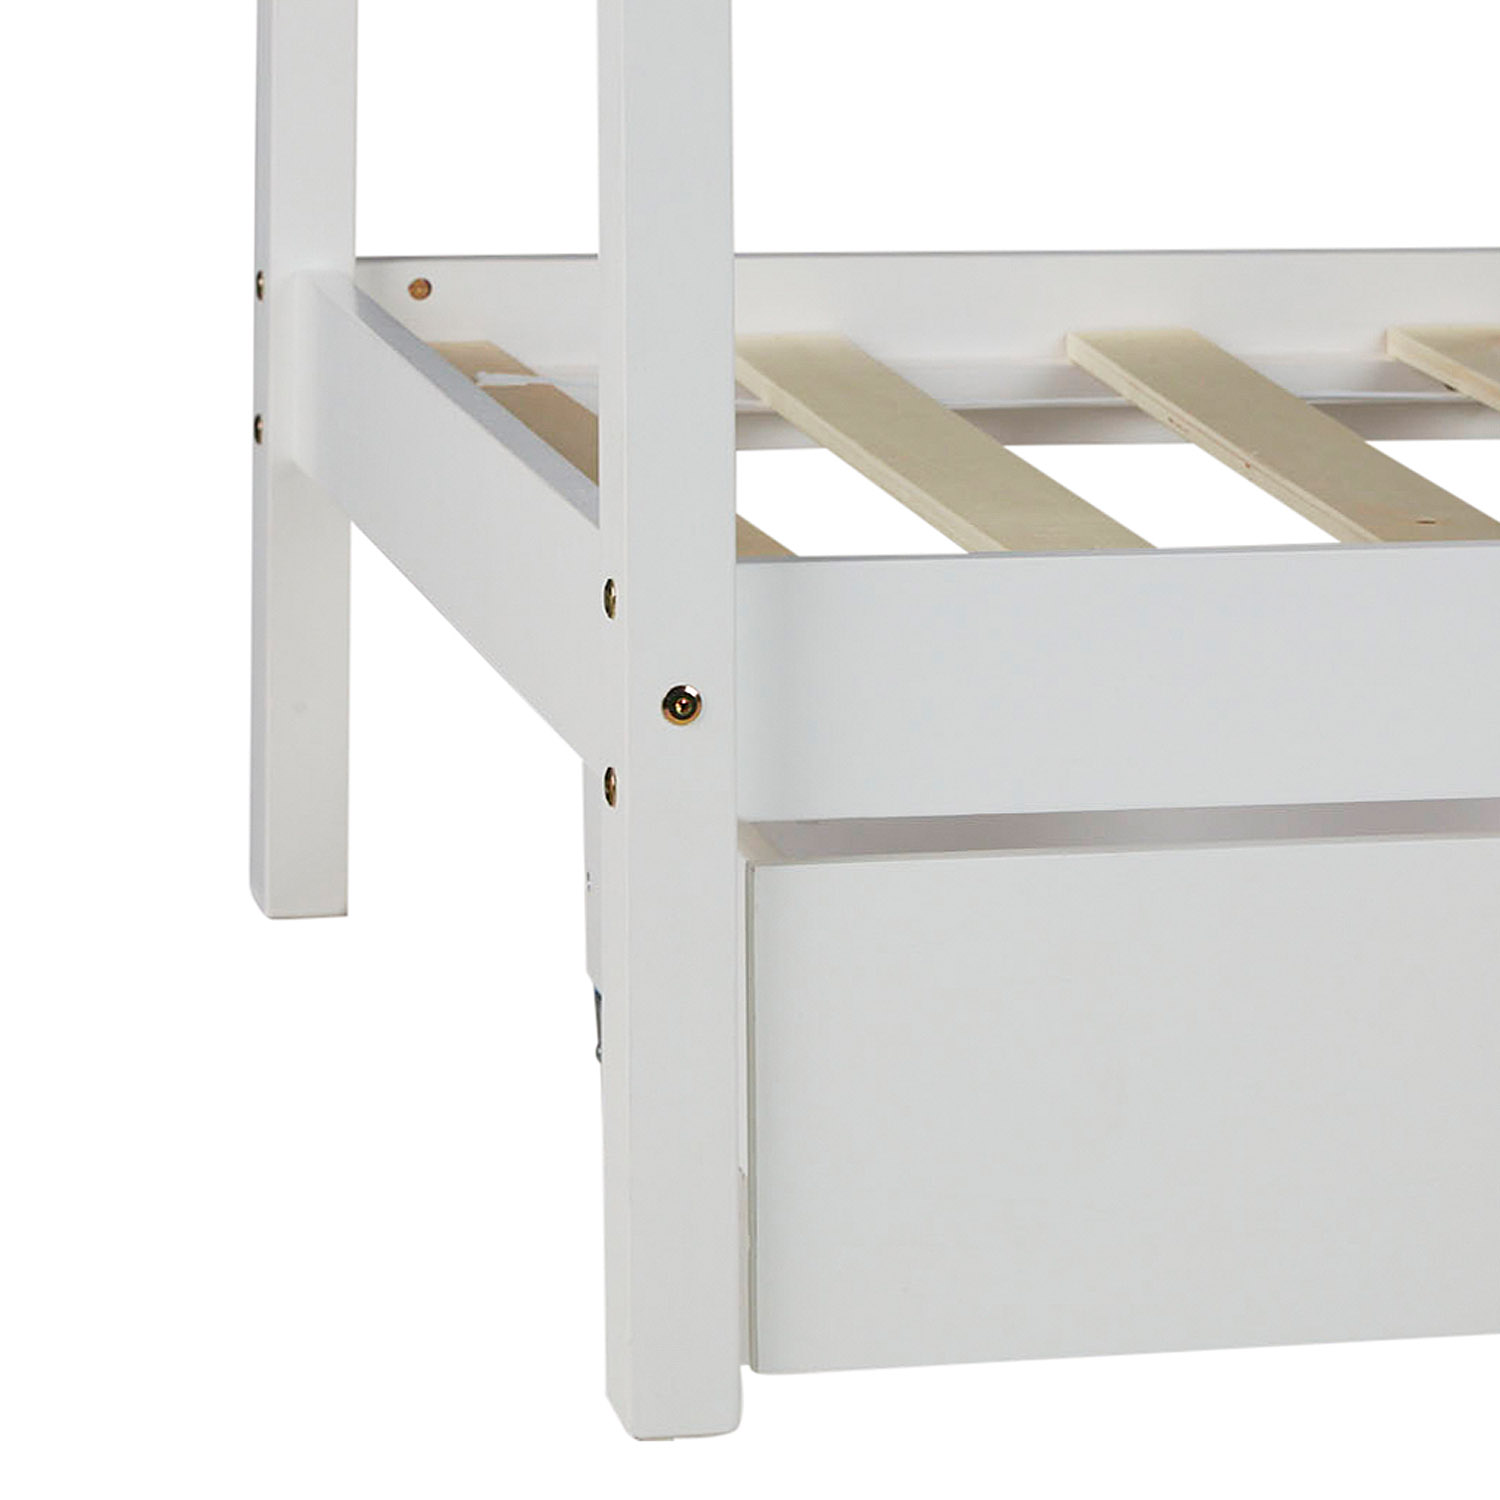 Cot Children's House White Grey Play Bed Wooden Bed 90 x 200 cm with Mattress Slatted Frame 